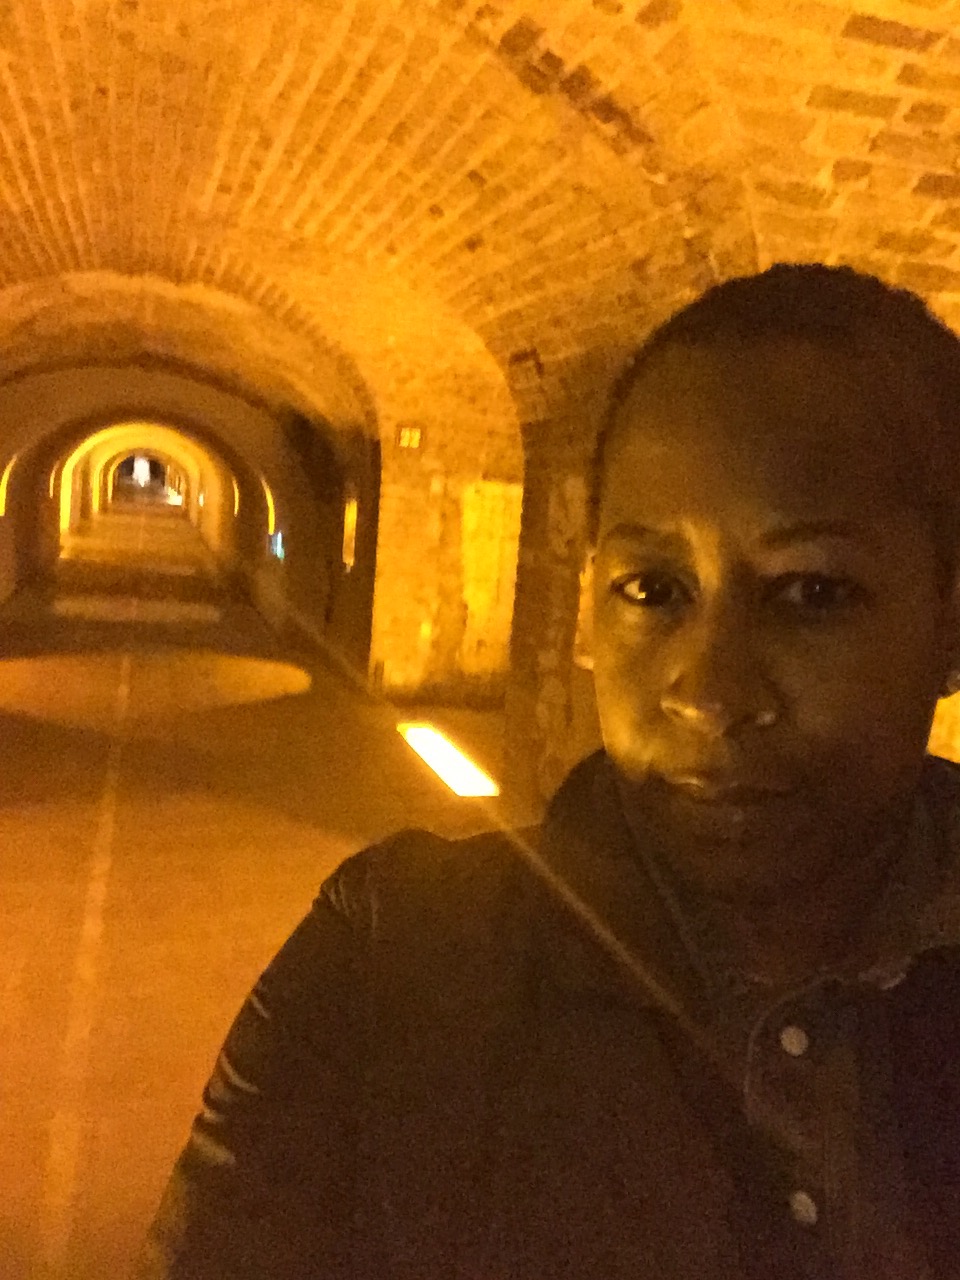 In the Moët caves